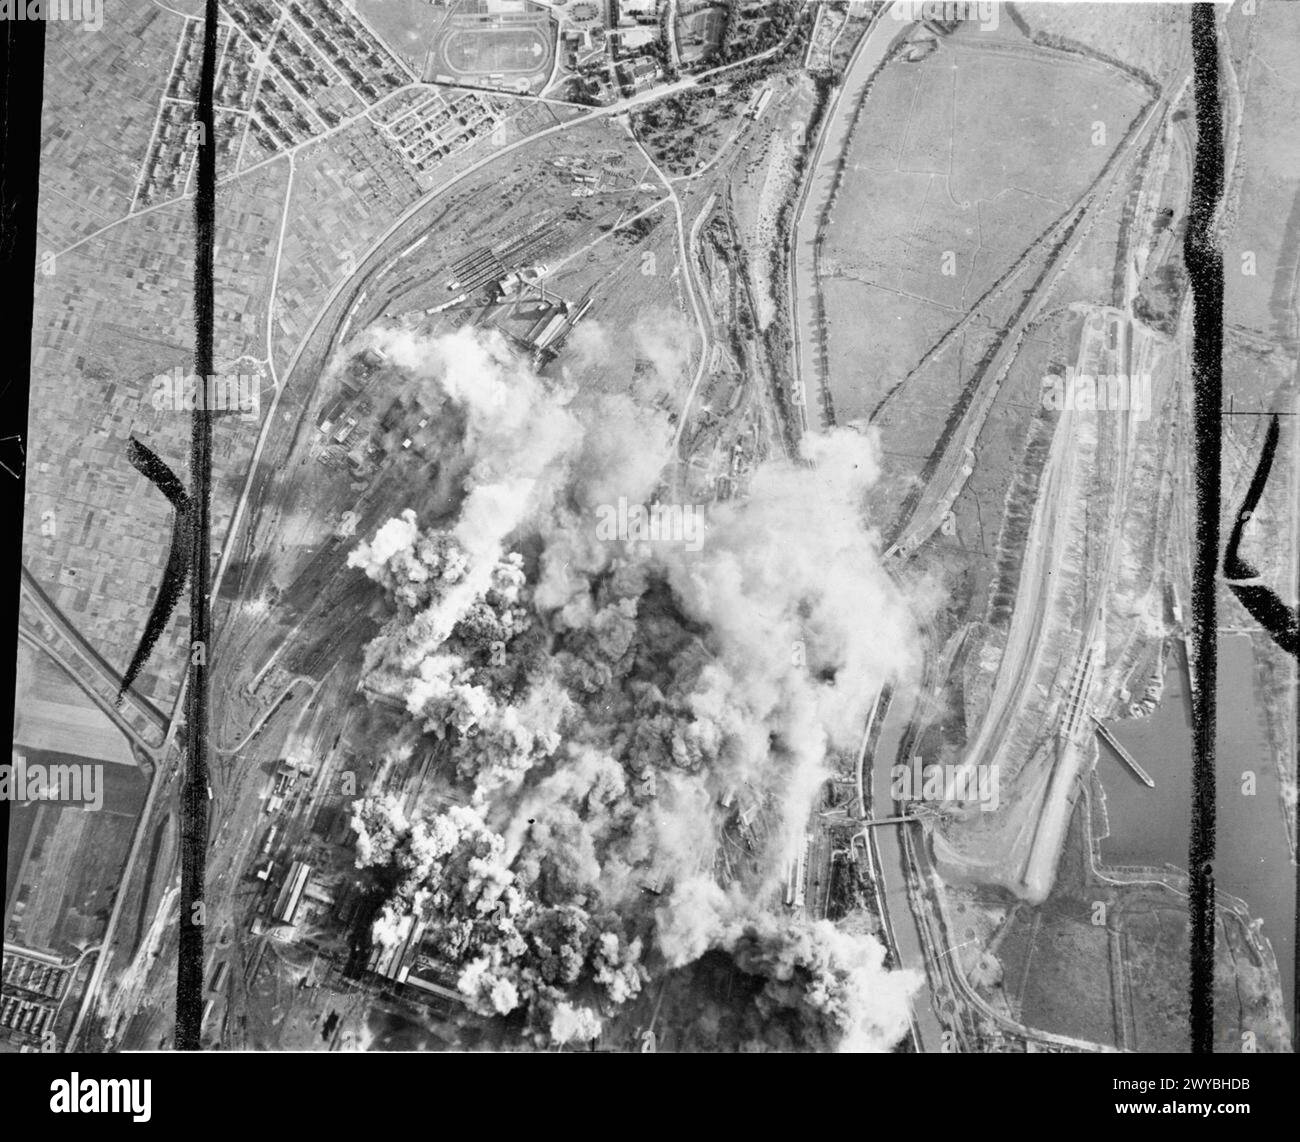 ROYAL AIR FORCE: 2ND TACTICAL AIR FORCE, 1943-1945. - Smoke from exploding bombs rises from the Colombelles steel works, east of Caen, during the attack by No. 2 Group on this German strongpoint. 48 North American Mitchells and 24 Douglas Bostons dropped a mixed load of 284 500-lb bombs and 48 1,000-lb bombs on the target. The Orne river can be seen to the right. , Royal Air Force, 2 Group, Royal Air Force, Maintenance Unit, 201 Stock Photo